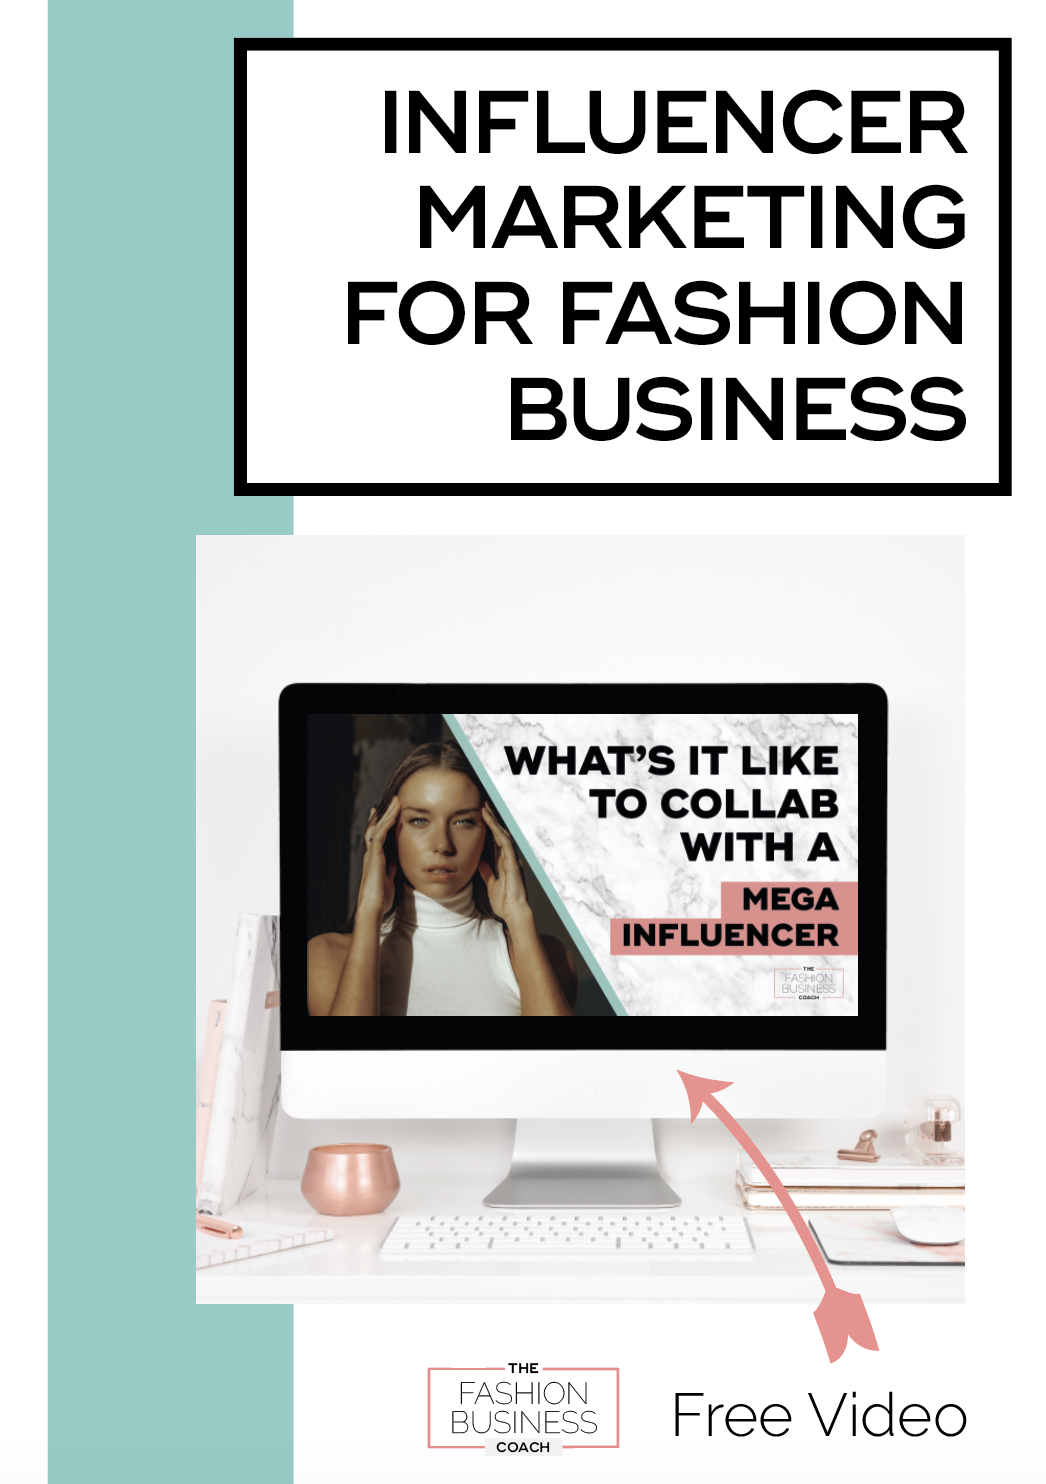 Influencer Marketing for Fashion Business 3.png